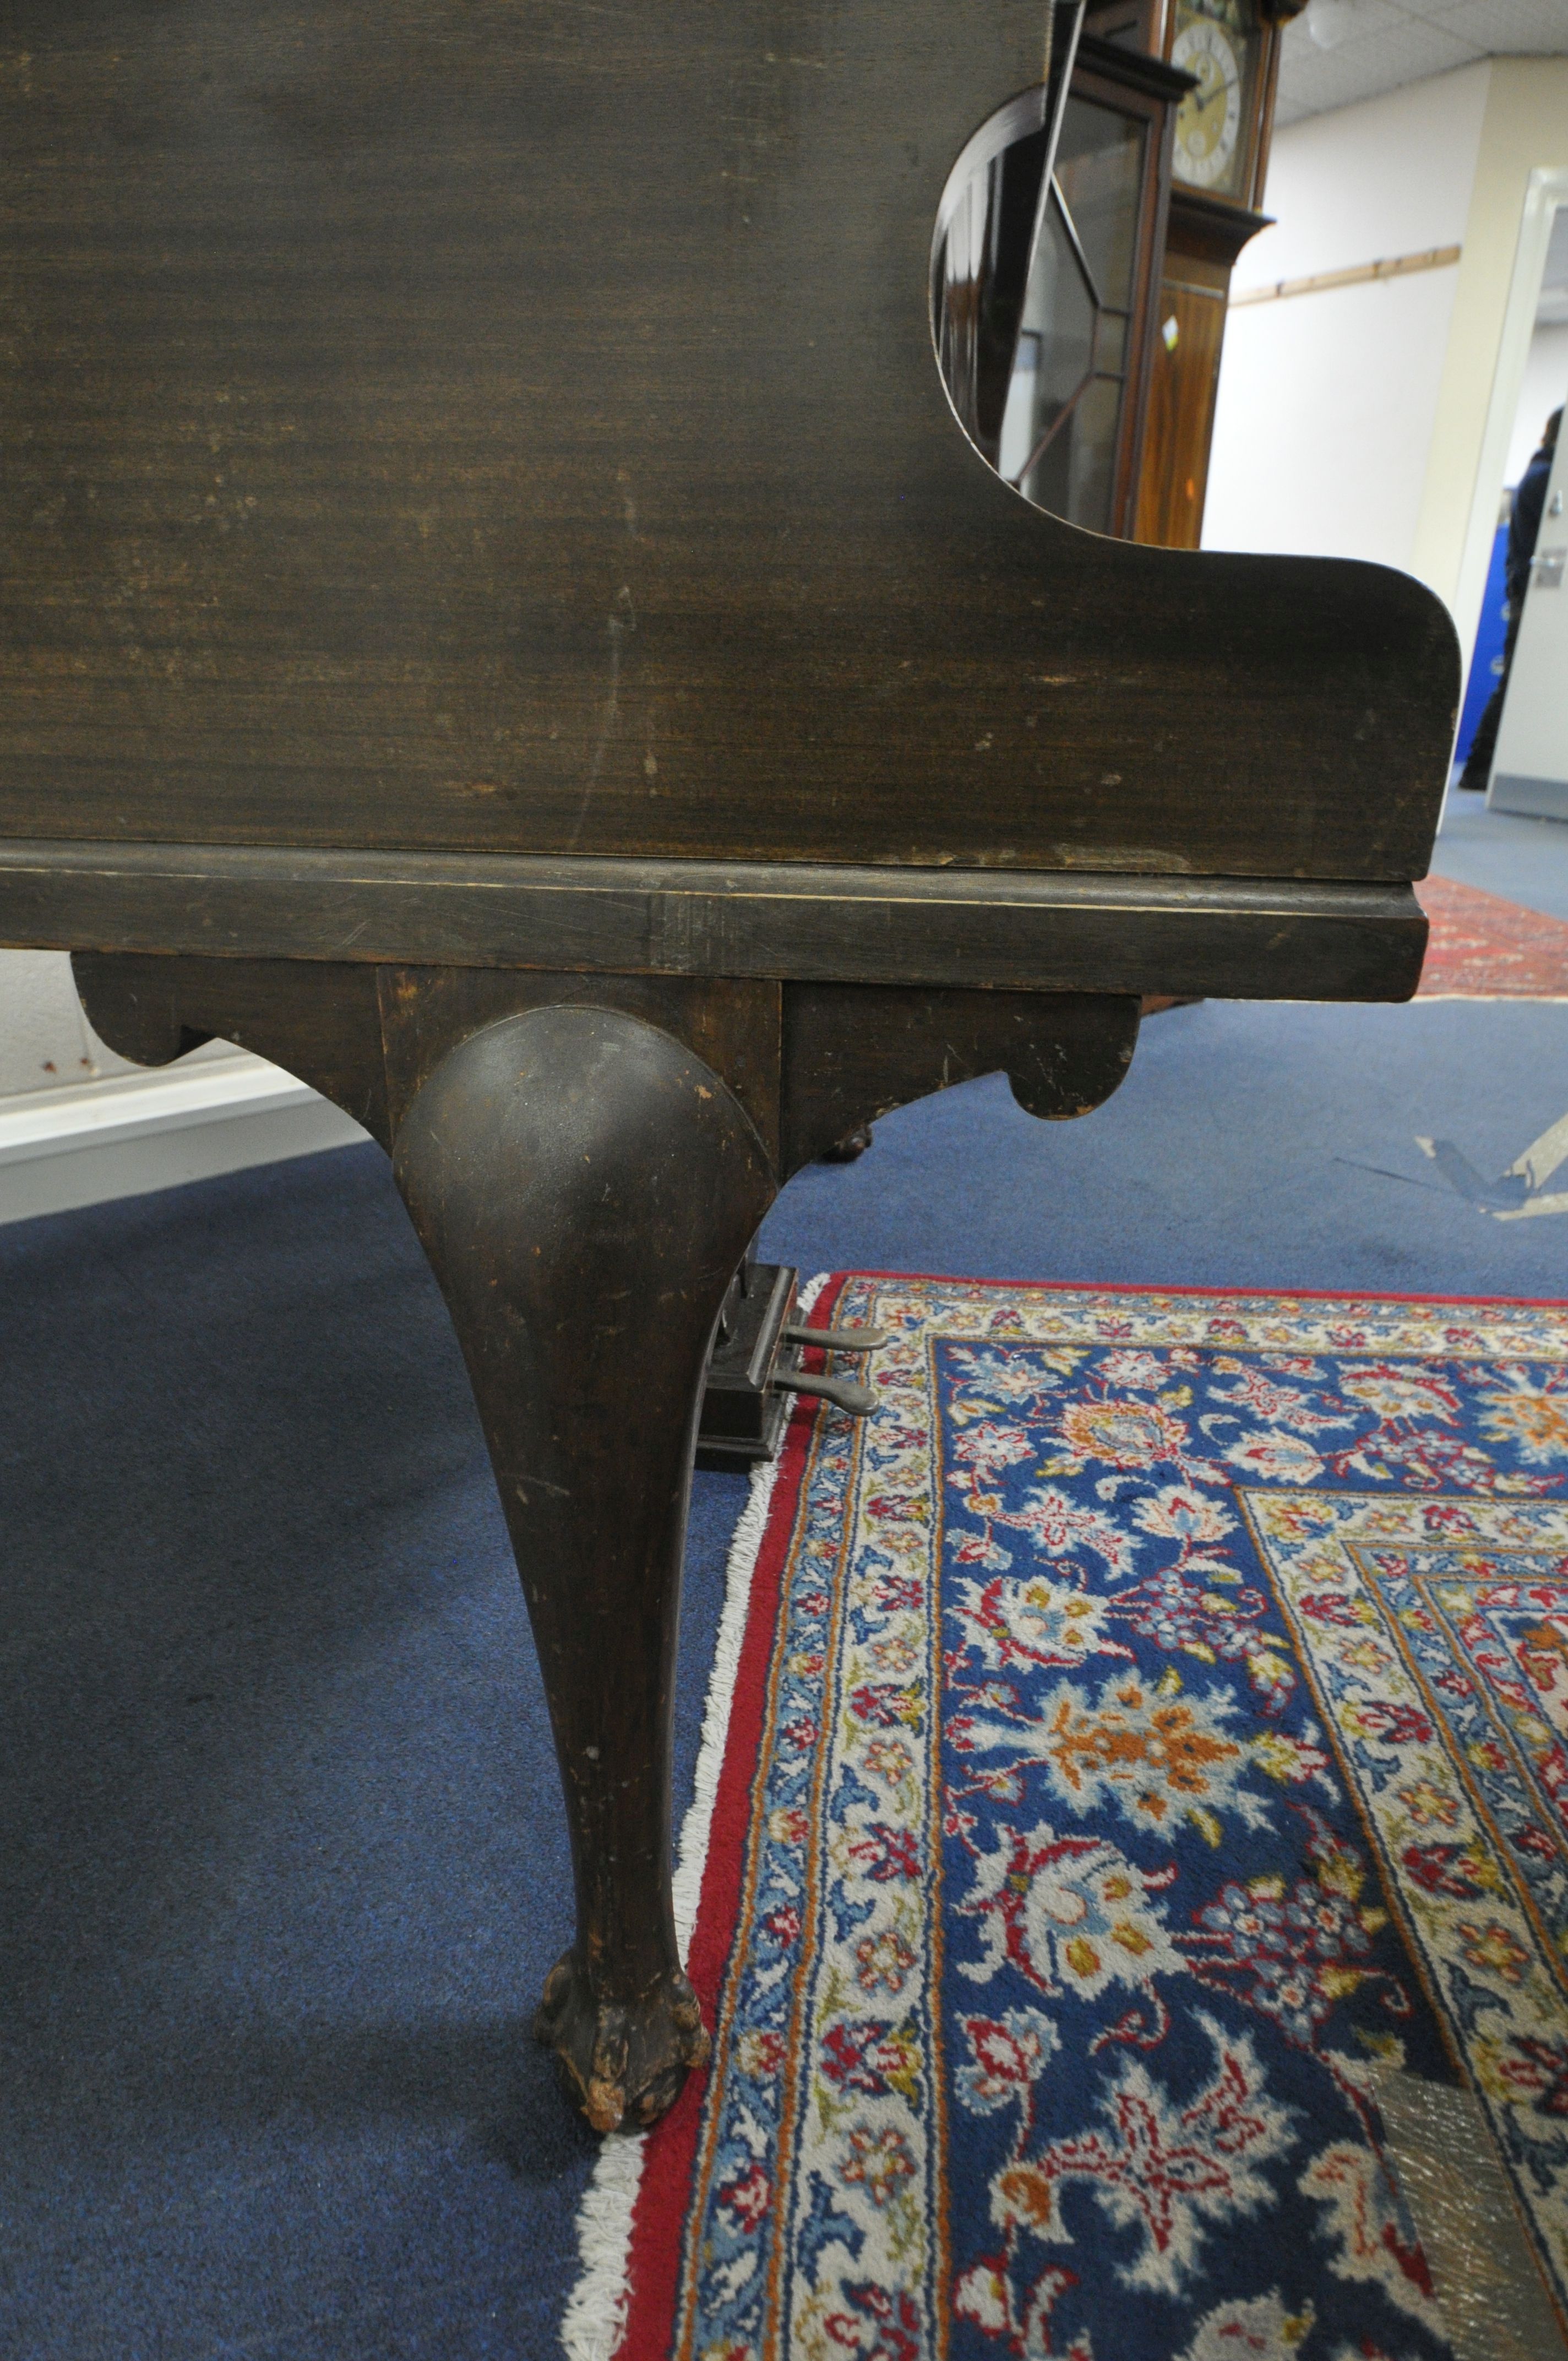 A CHALLEN MAHOGANY 4FT 7 INCH BABY GRAND PIANO, serial number 46474, bone keys, on cabriole legs, - Image 6 of 9